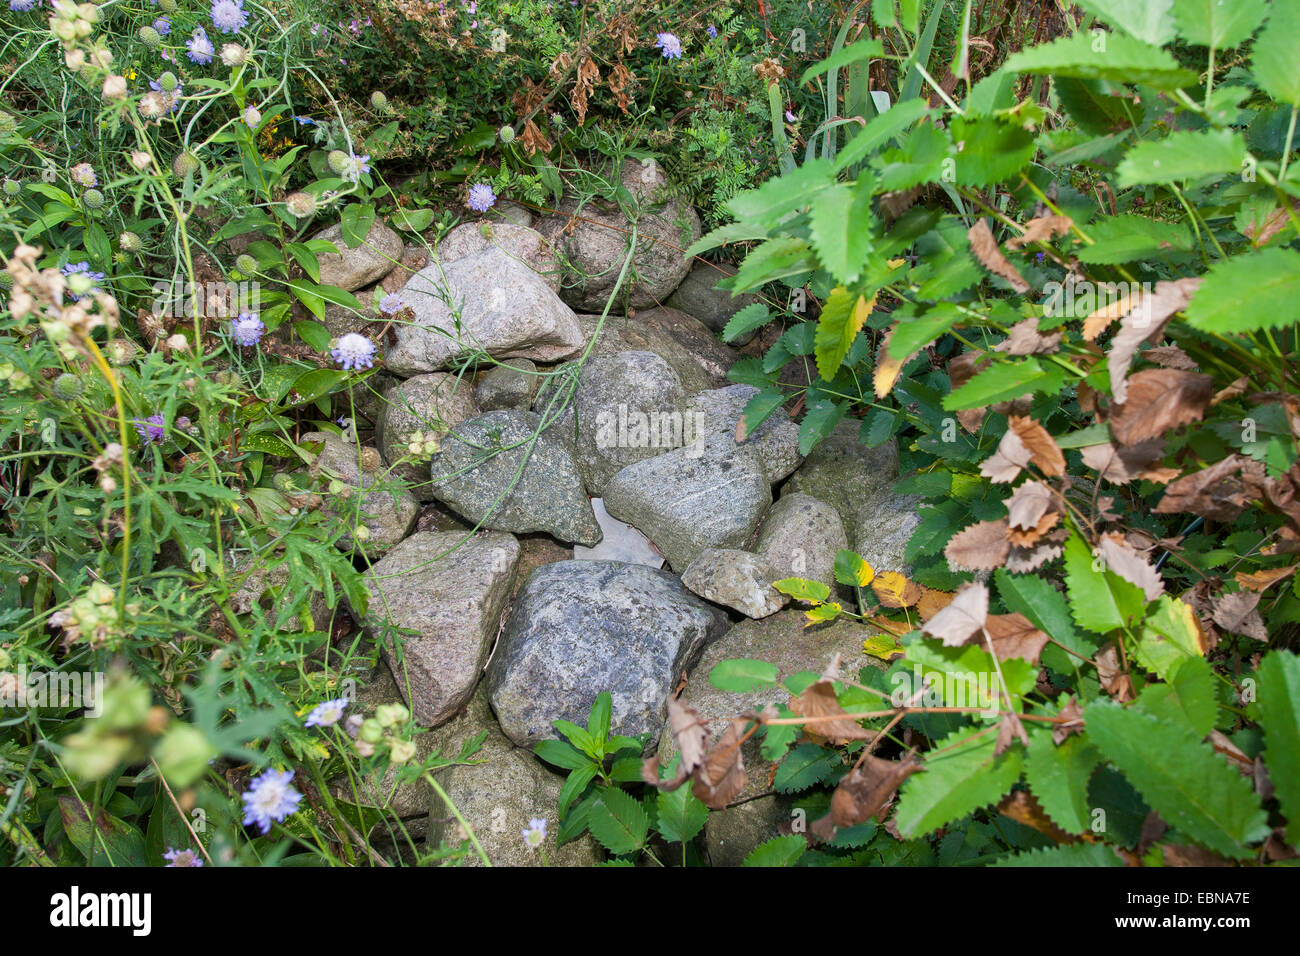 natural stones on a pile of stones, as shelter, habitat for animals in the garden, Germany Stock Photo